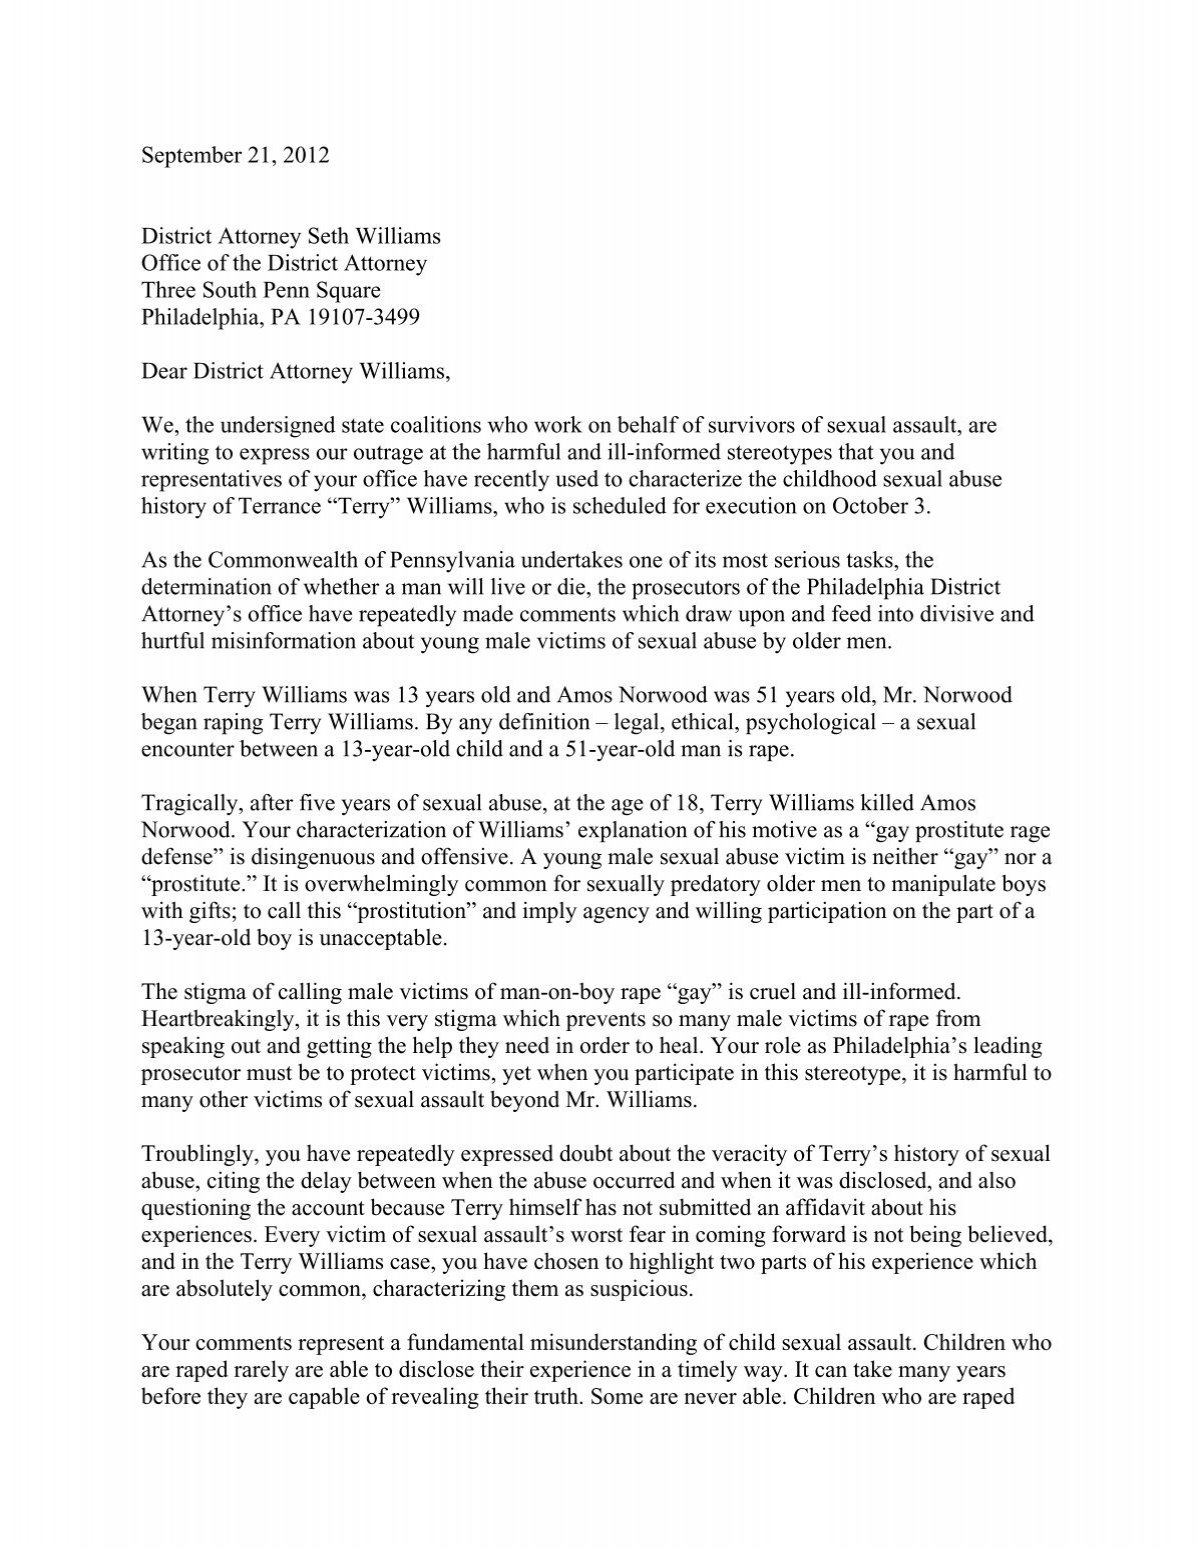 Letter To District Attorney Williams From State Sexual Assault